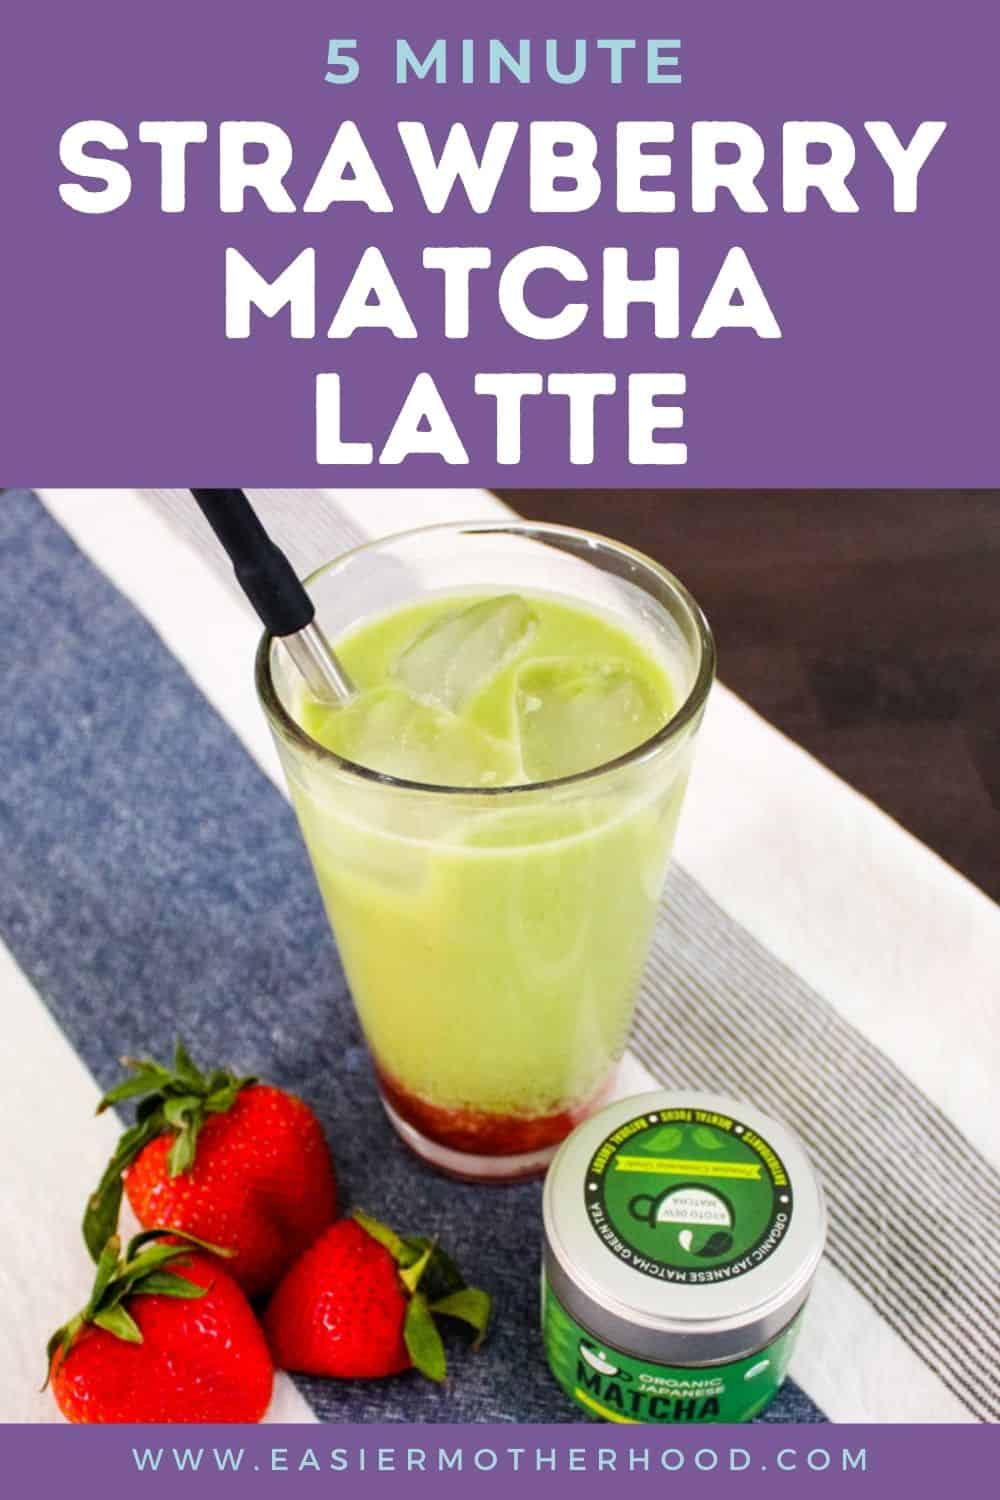 Pin with beverage, matcha container, and fresh strawberries on a table, text reads "5 minute strawberry matcha latte".